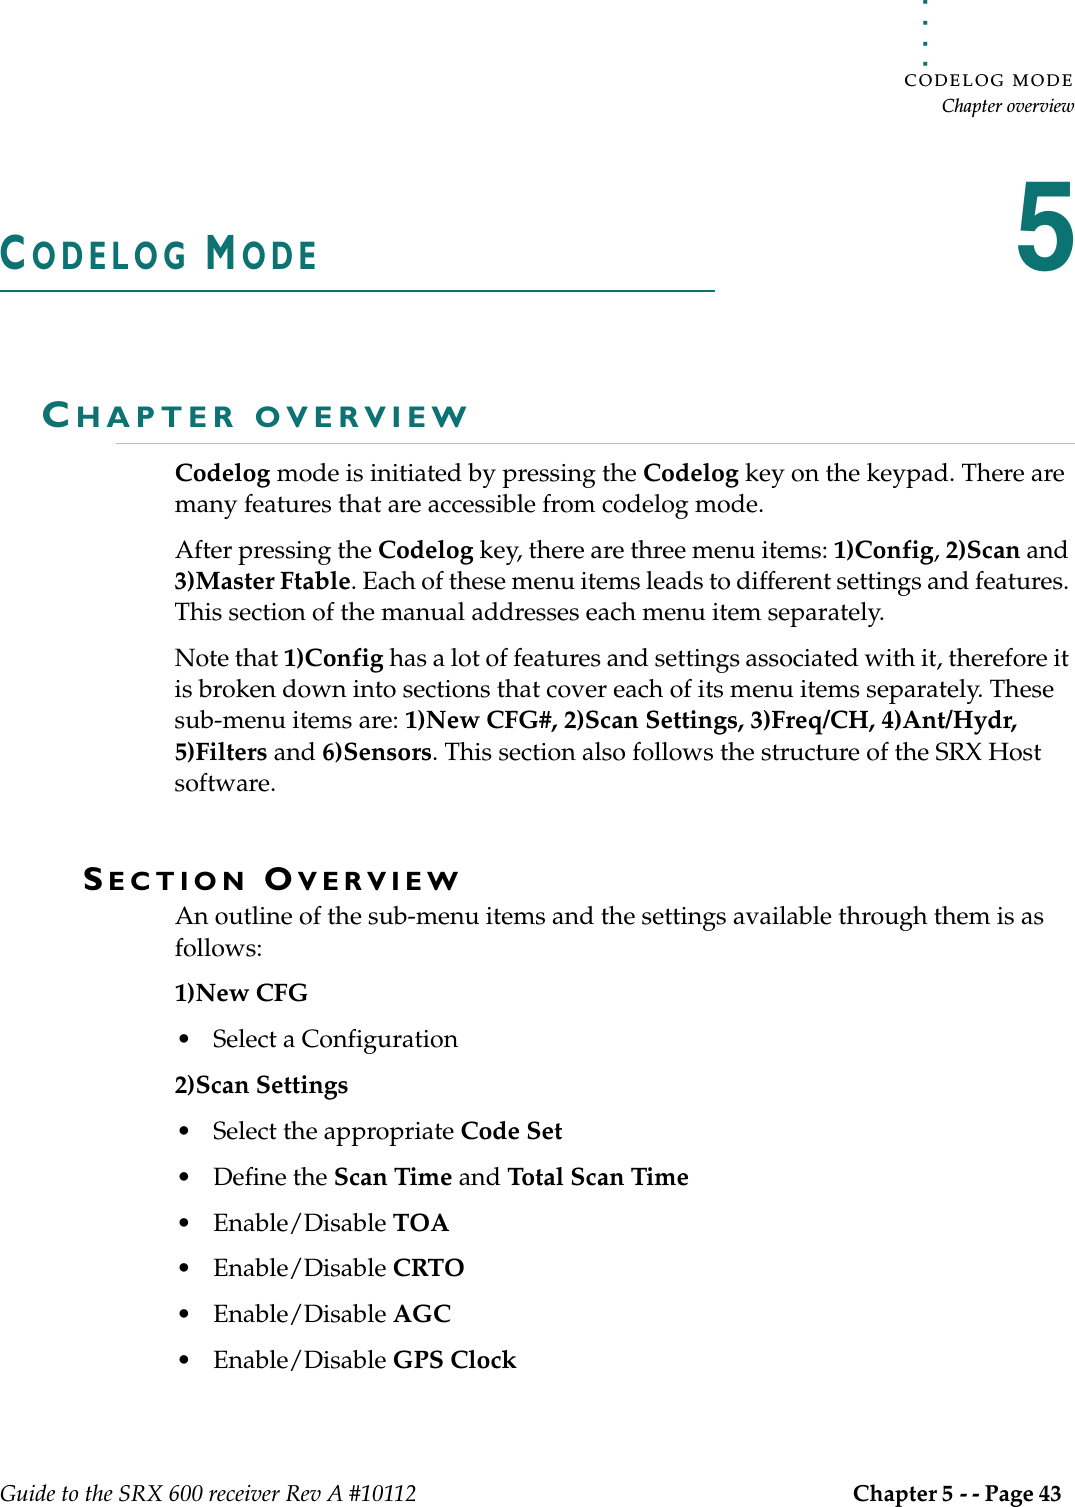 . . . . .CODELOG MODEChapter overviewGuide to the SRX 600 receiver Rev A #10112 Chapter 5 - - Page 43 CODELOG MODE5CHAPTER OVERVIEWCodelog mode is initiated by pressing the Codelog key on the keypad. There are many features that are accessible from codelog mode. After pressing the Codelog key, there are three menu items: 1)Config, 2)Scan and 3)Master Ftable. Each of these menu items leads to different settings and features. This section of the manual addresses each menu item separately.Note that 1)Config has a lot of features and settings associated with it, therefore it is broken down into sections that cover each of its menu items separately. These sub-menu items are: 1)New CFG#, 2)Scan Settings, 3)Freq/CH, 4)Ant/Hydr, 5)Filters and 6)Sensors. This section also follows the structure of the SRX Host software.SECTION OVERVIEWAn outline of the sub-menu items and the settings available through them is as follows:1)New CFG• Select a Configuration 2)Scan Settings• Select the appropriate Code Set• Define the Scan Time and Total Scan Time• Enable/Disable TOA• Enable/Disable CRTO• Enable/Disable AGC• Enable/Disable GPS Clock